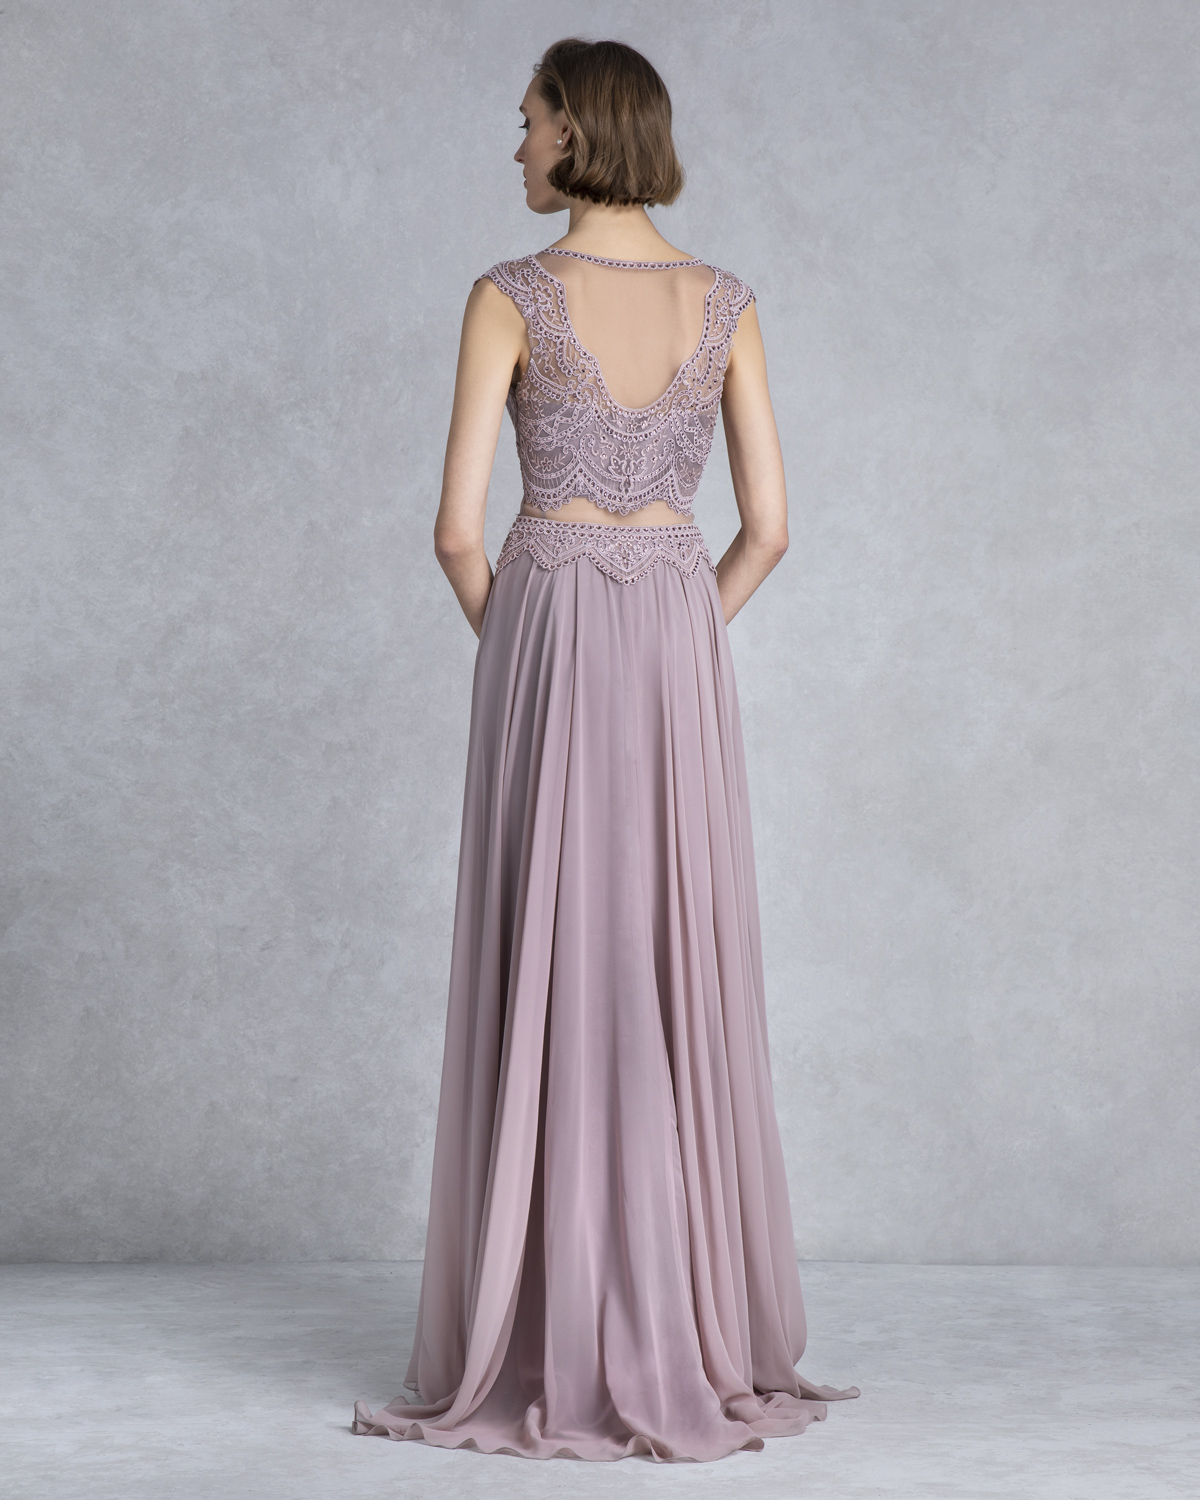 Вечерние платья / Long evening dress with lace and beading on the top